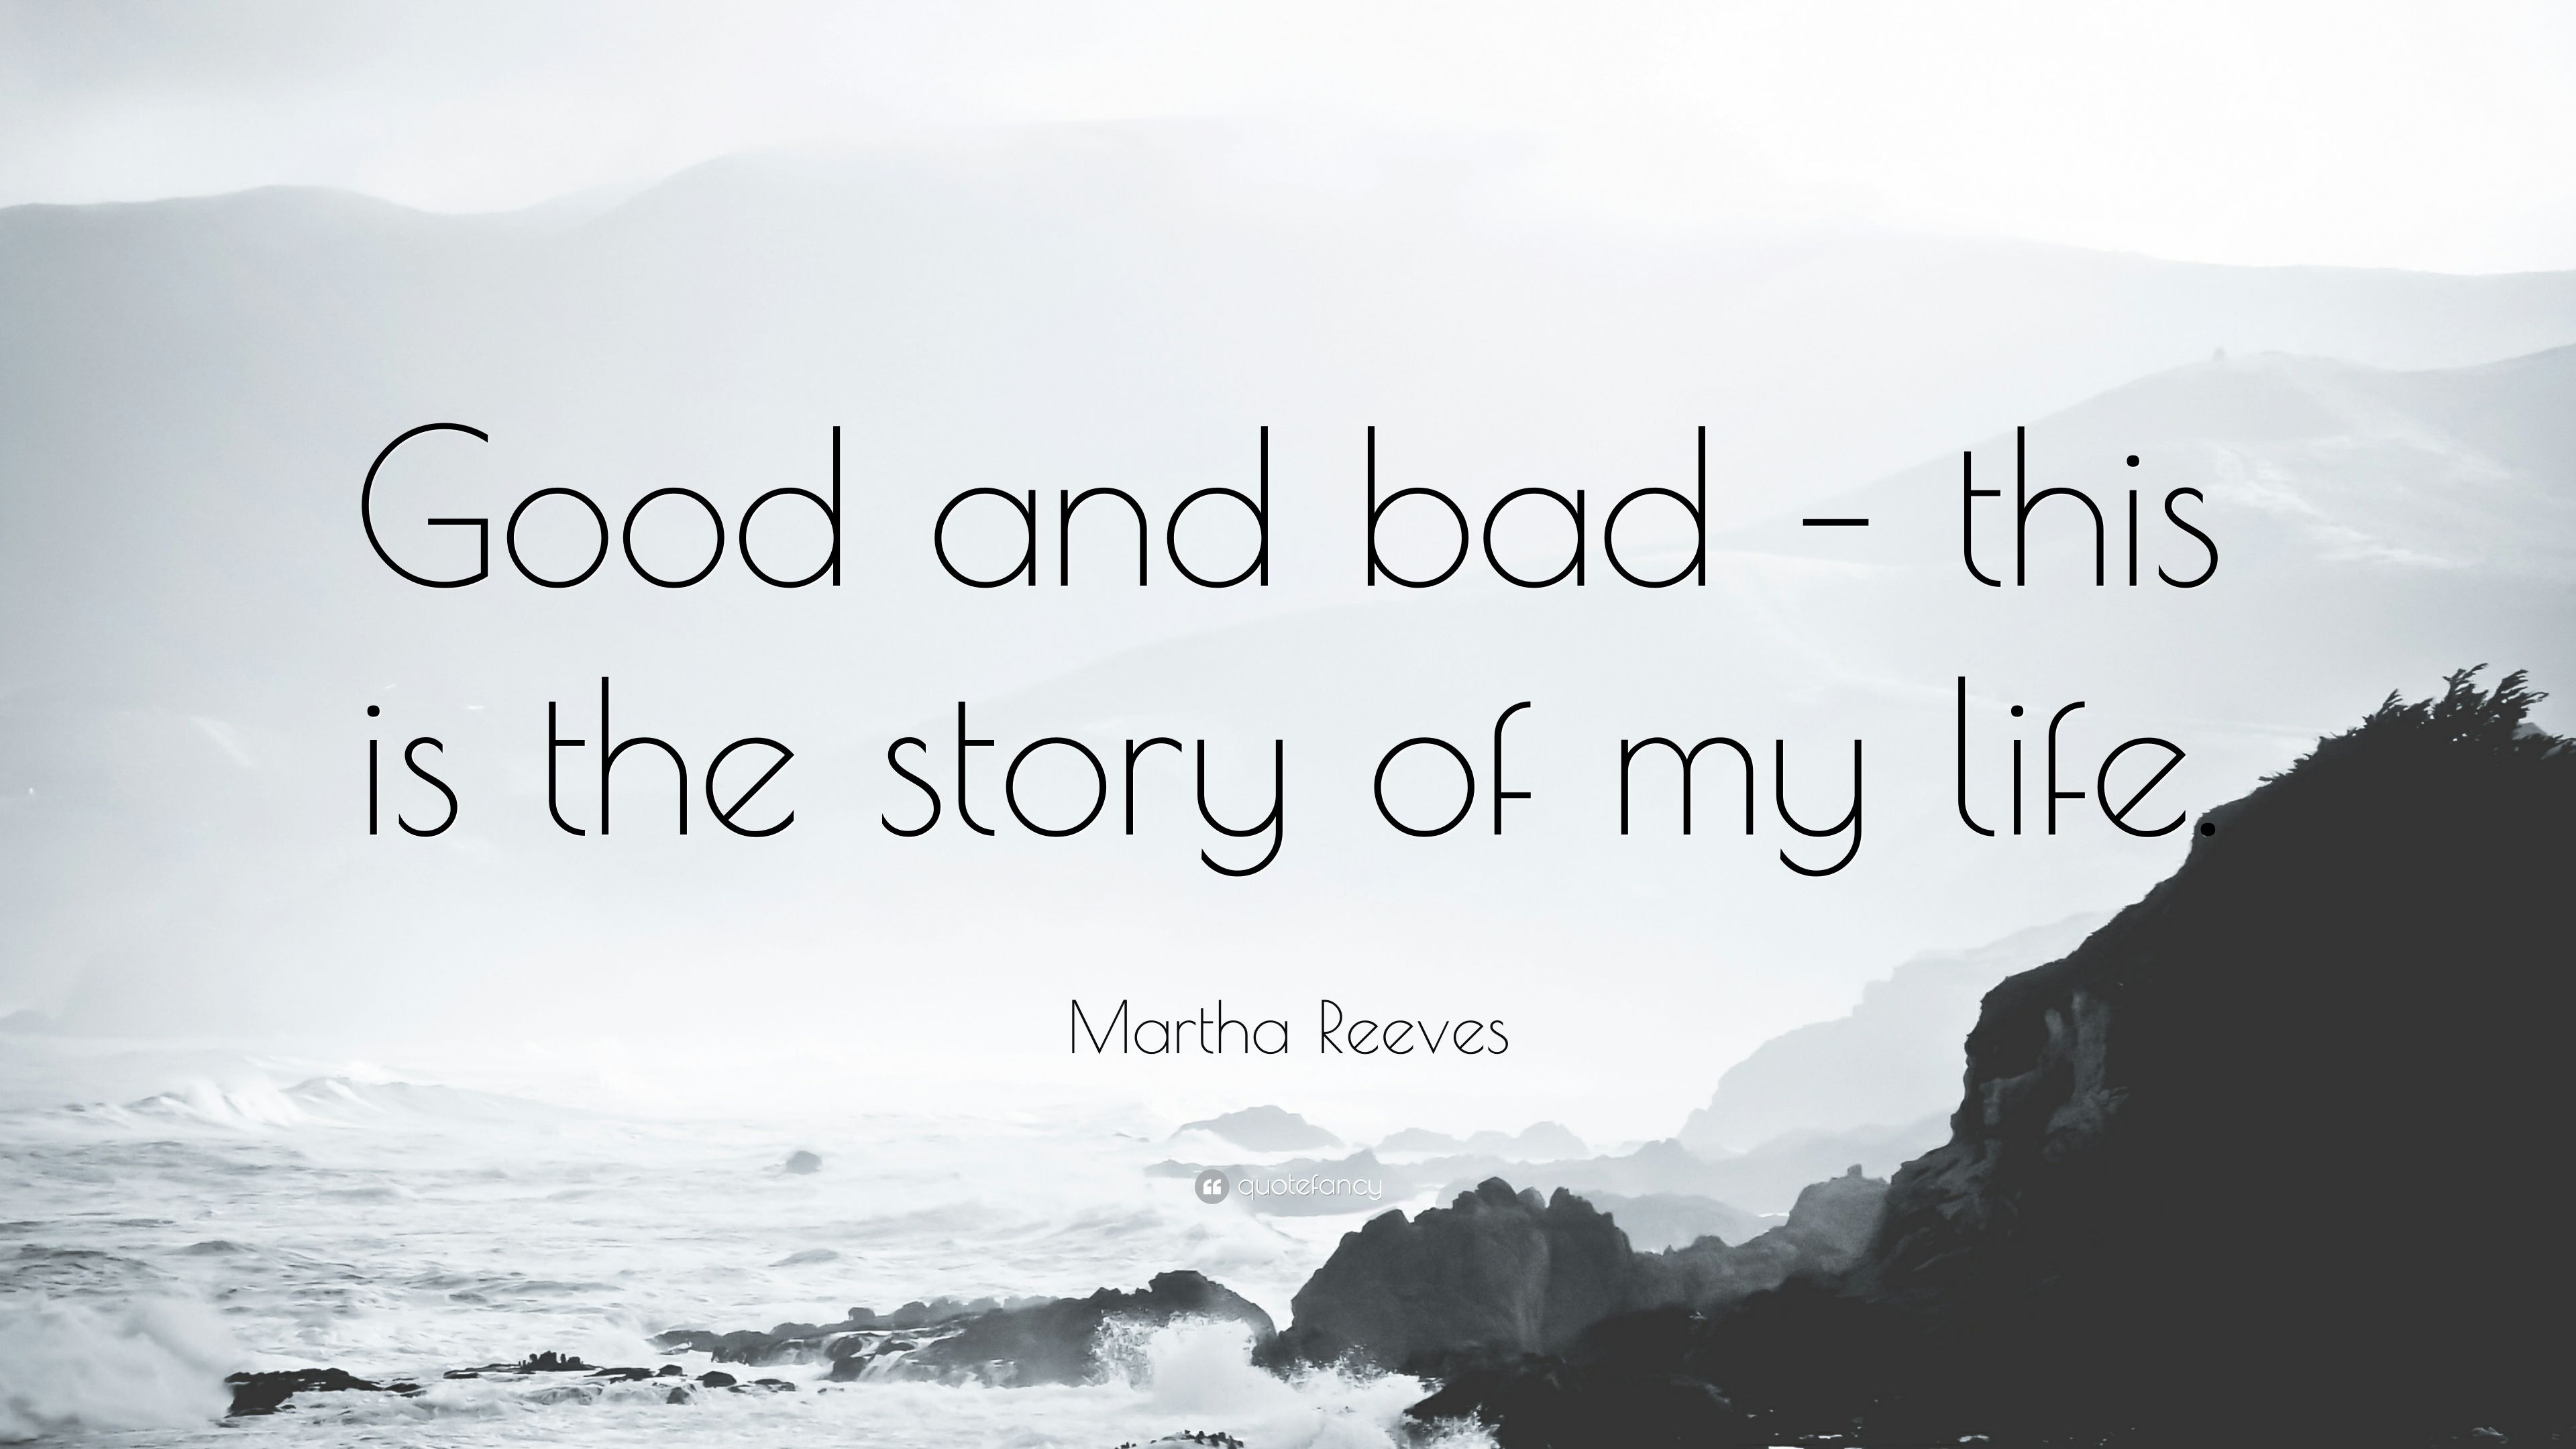 Martha Reeves Quote: “Good and bad